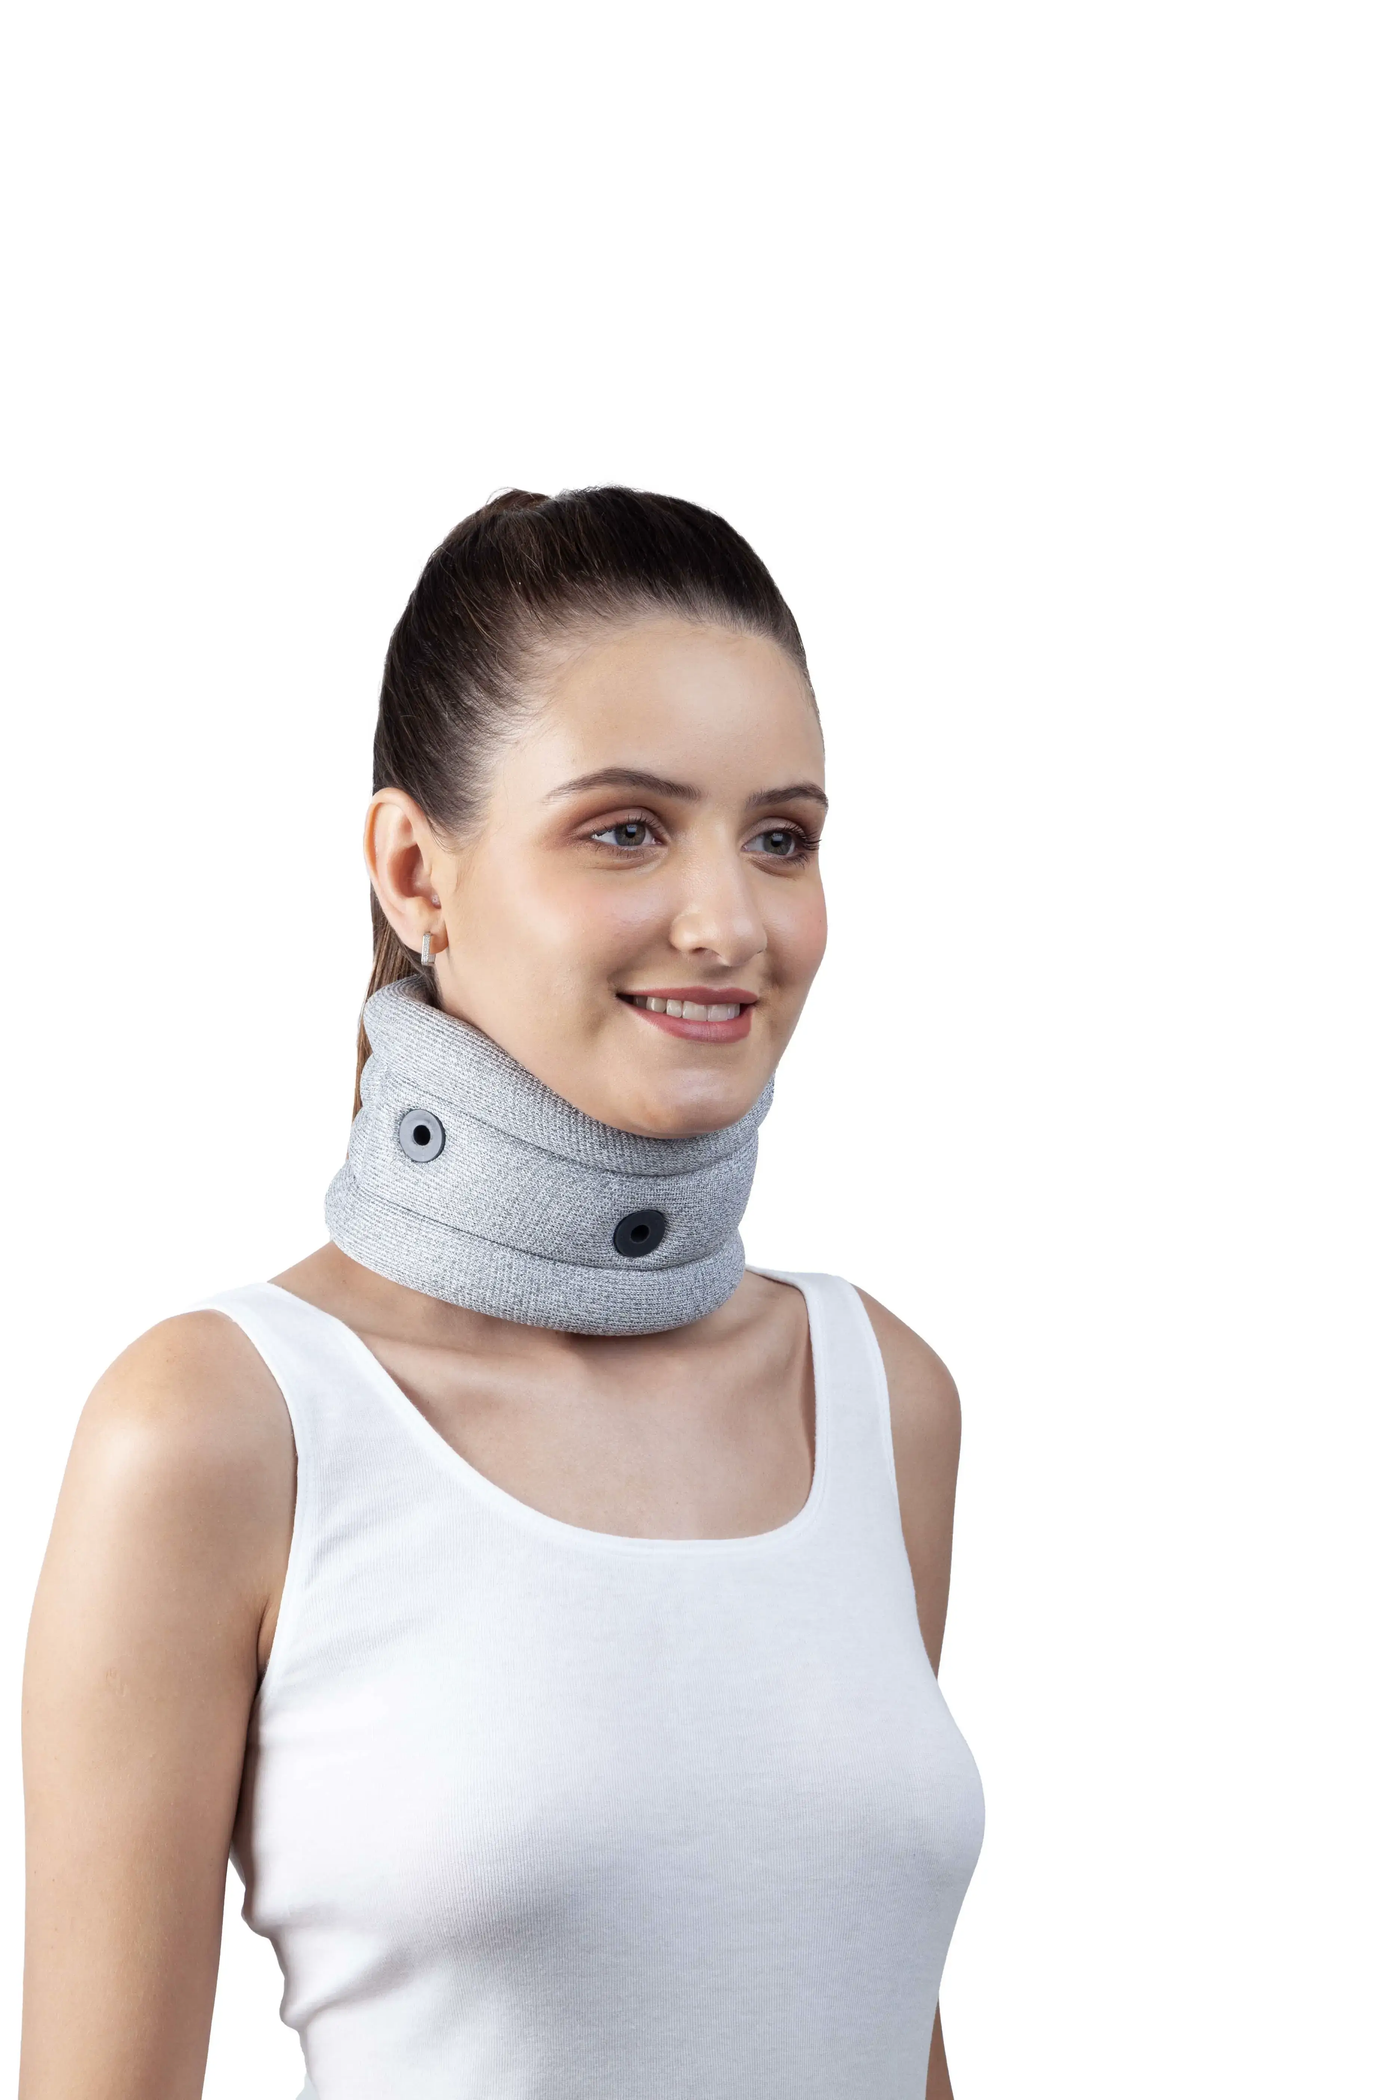 Medemove Cervical Collar With Soft Support